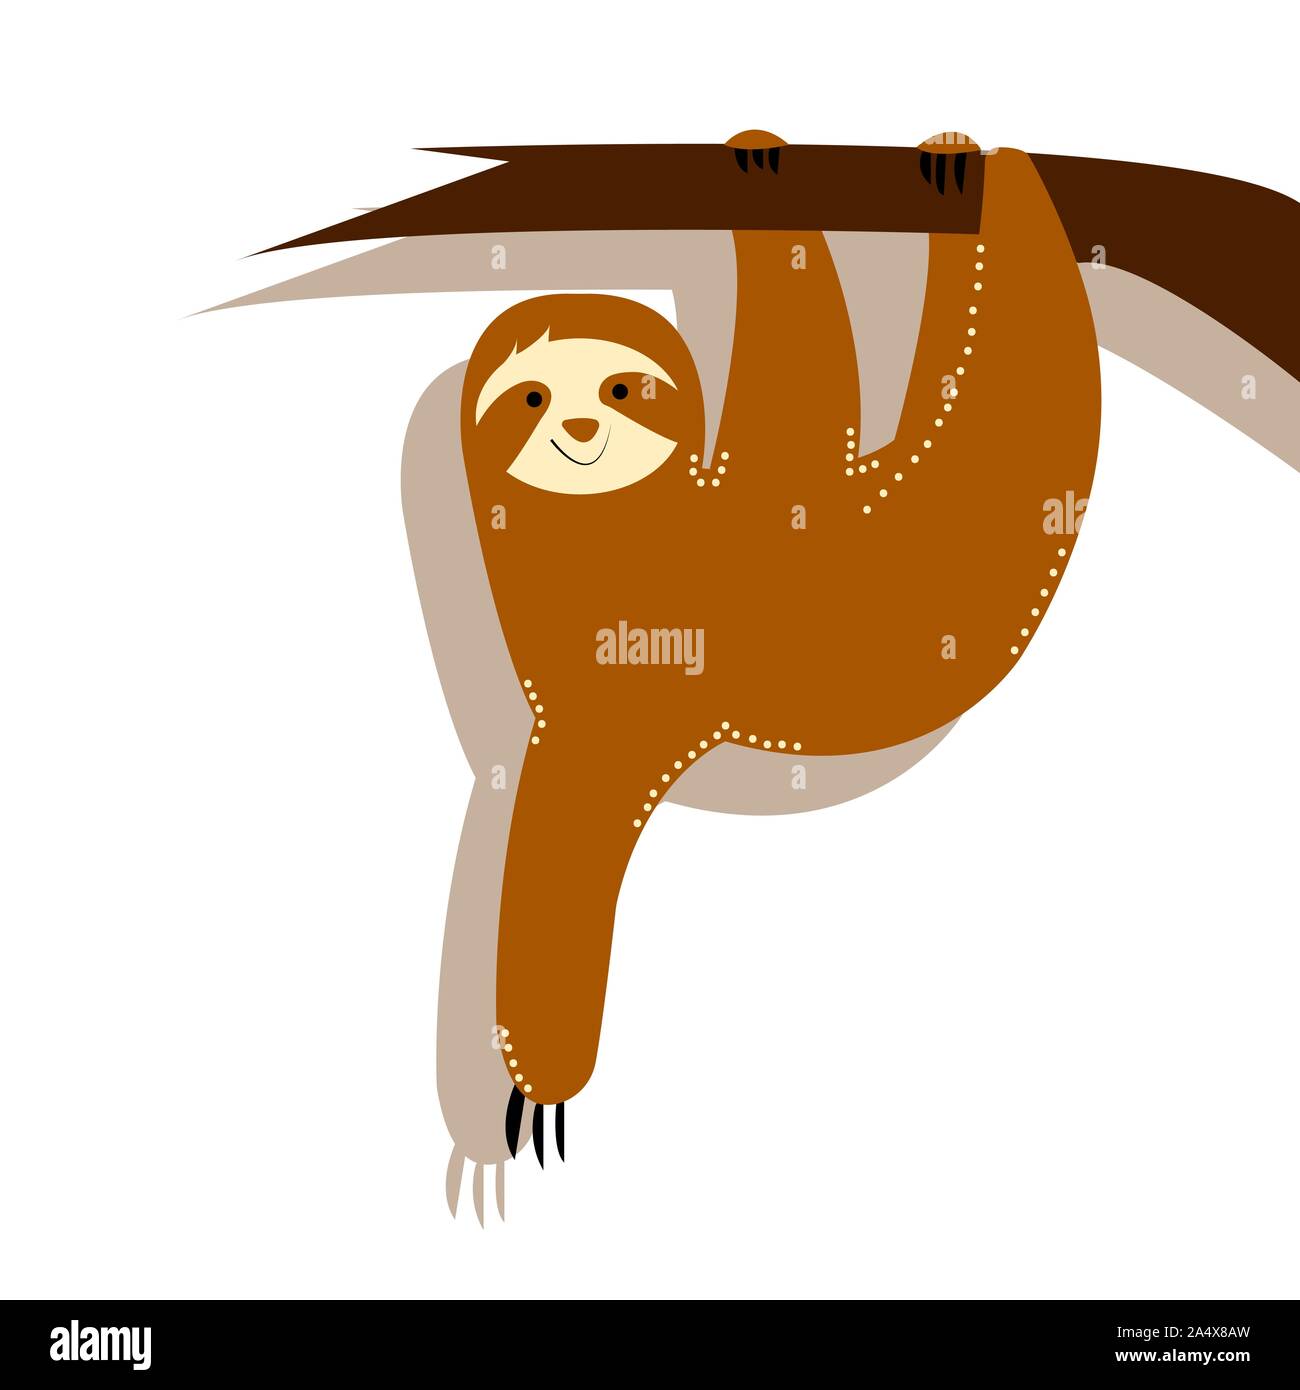 Cute Colorful Character Design With Funny Sloth Hanging On The Tree